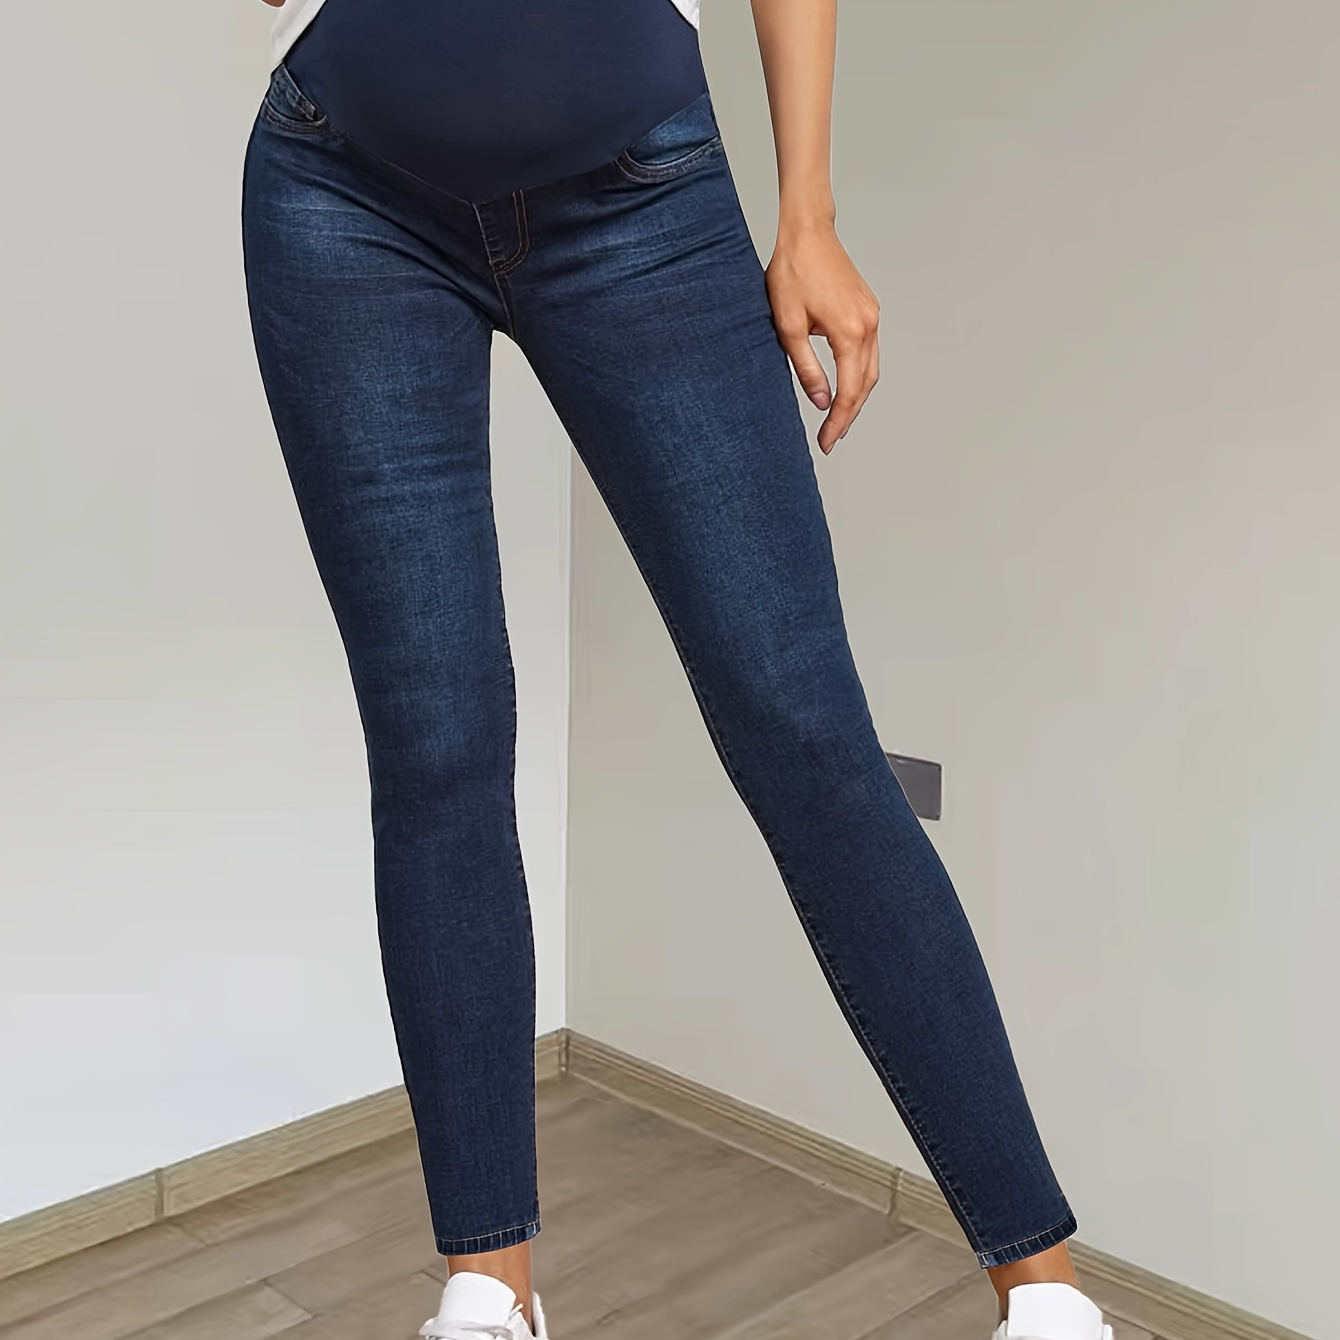 

Women's Maternity Solid Jeans, Fashion Casual Slim Fit Denim Pants, Pregnant Women's Clothing